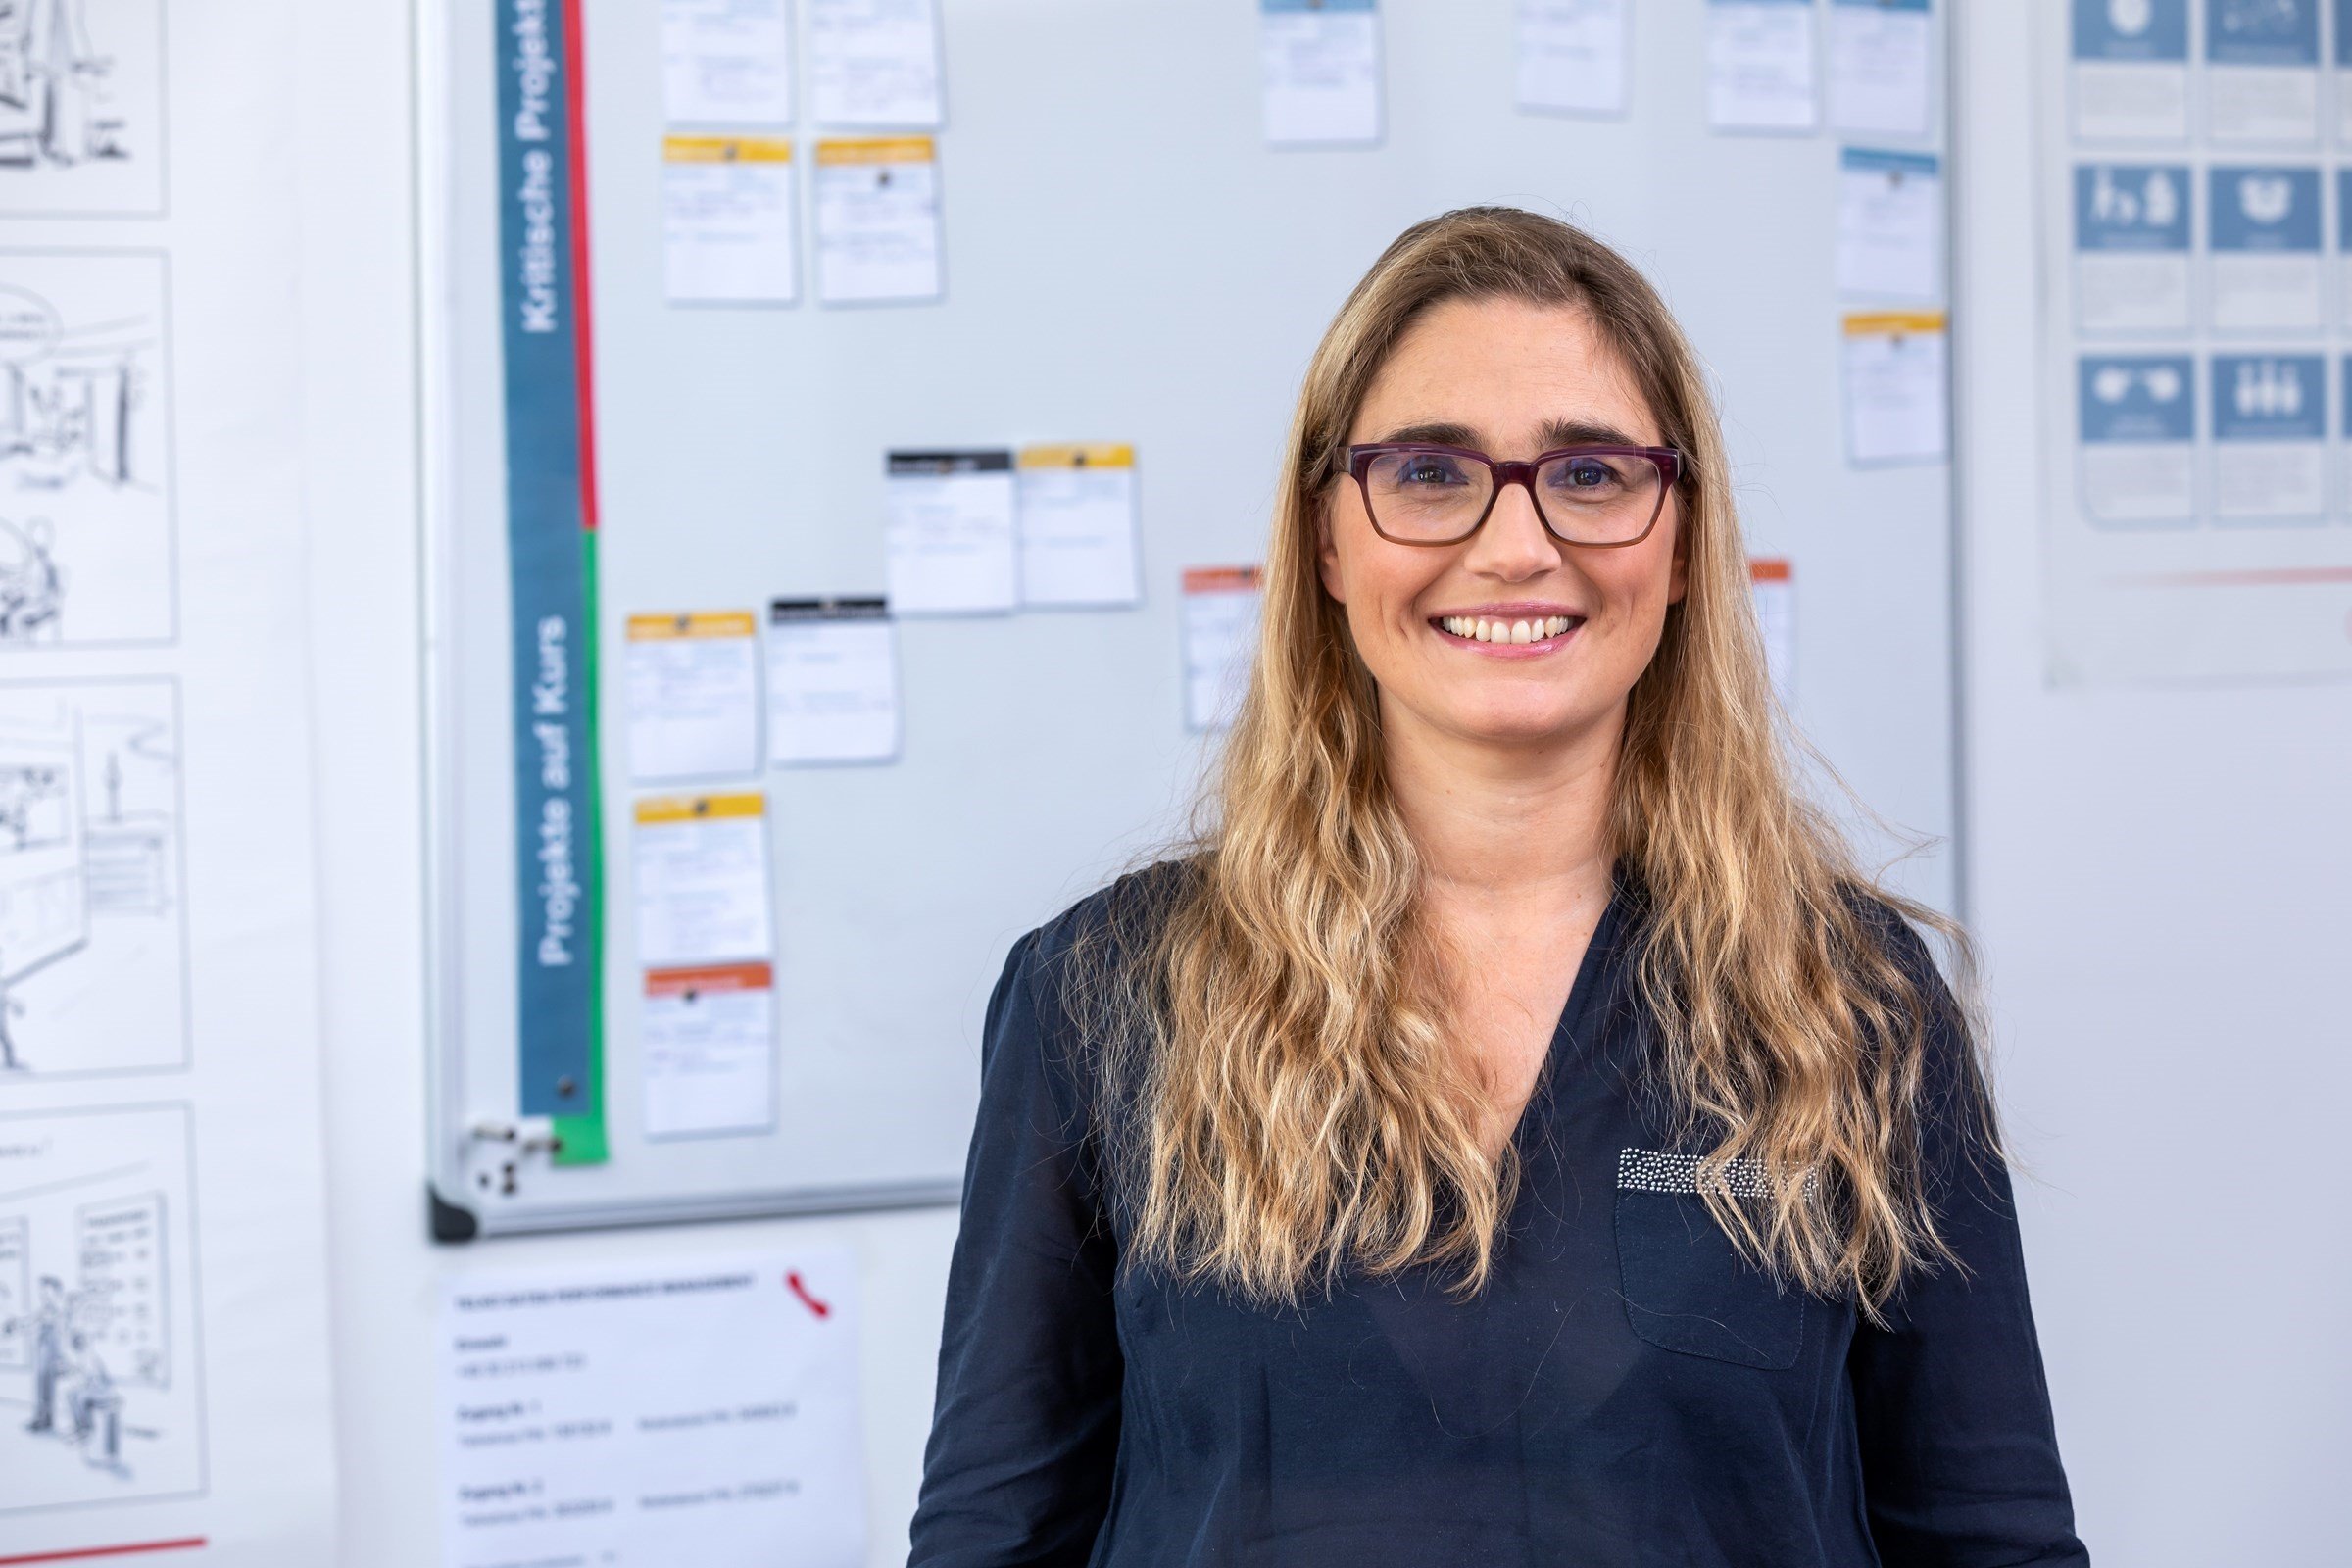 woman smiling in front of a blurred whiteboard brainstorming controller project management